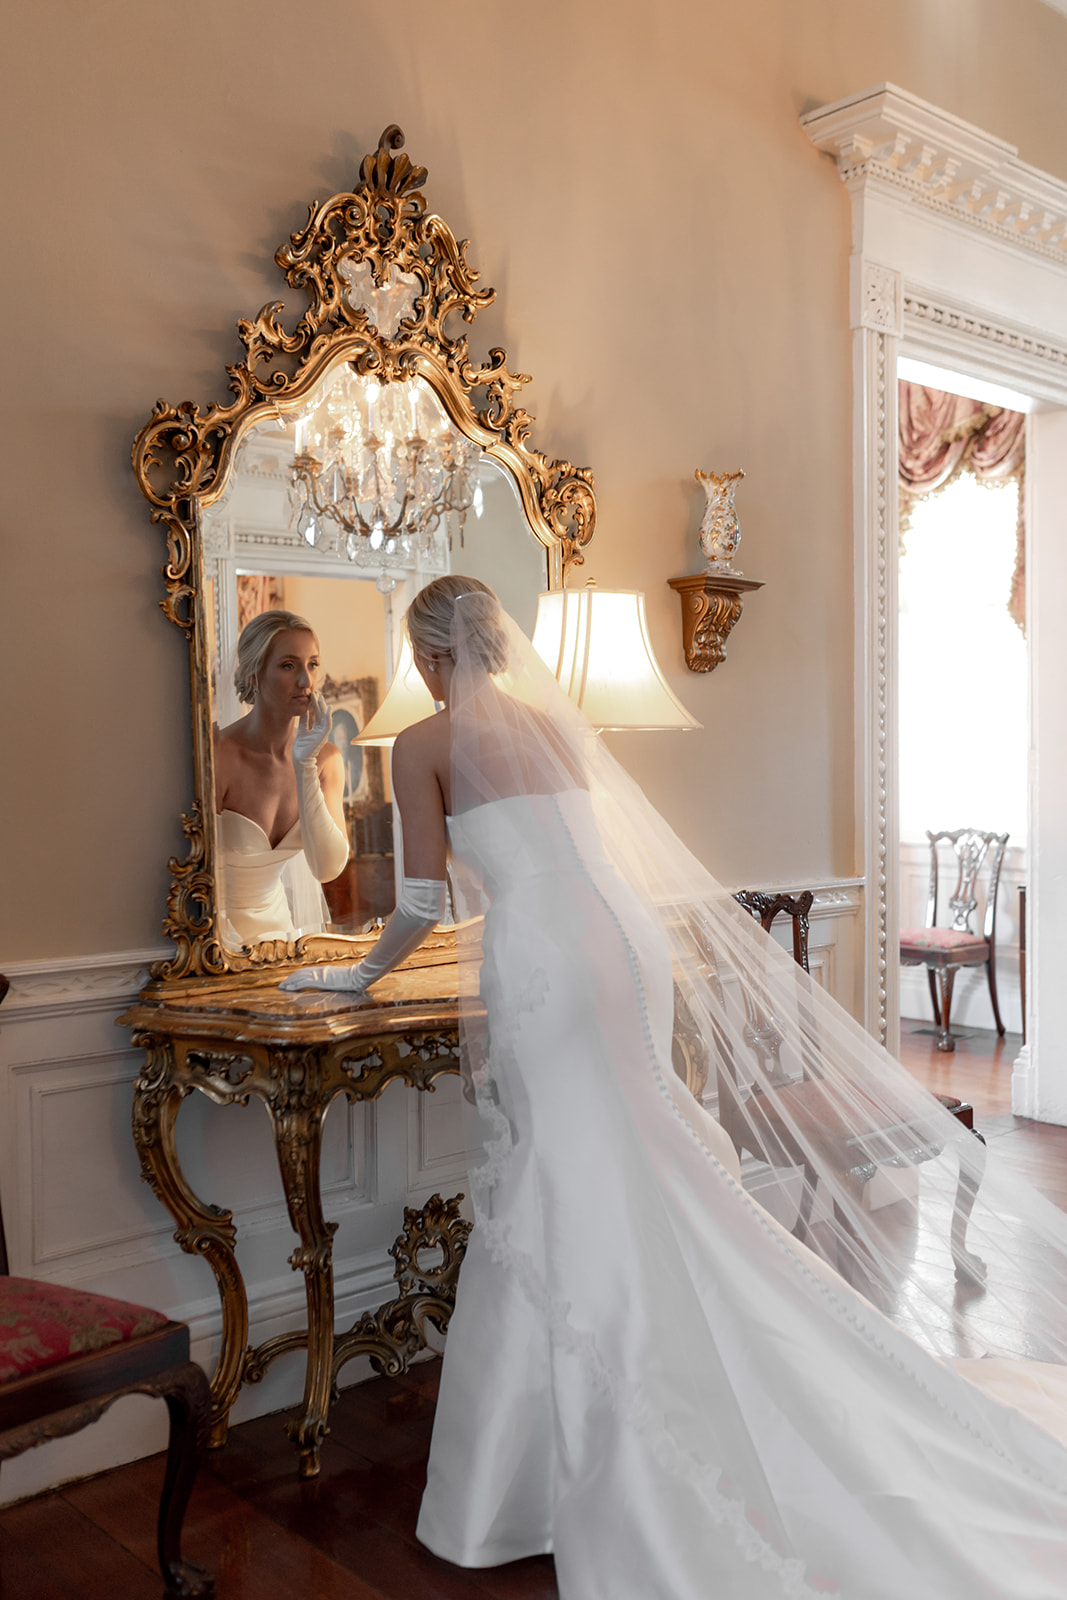 Bride looking into antique mirror with golden frame.